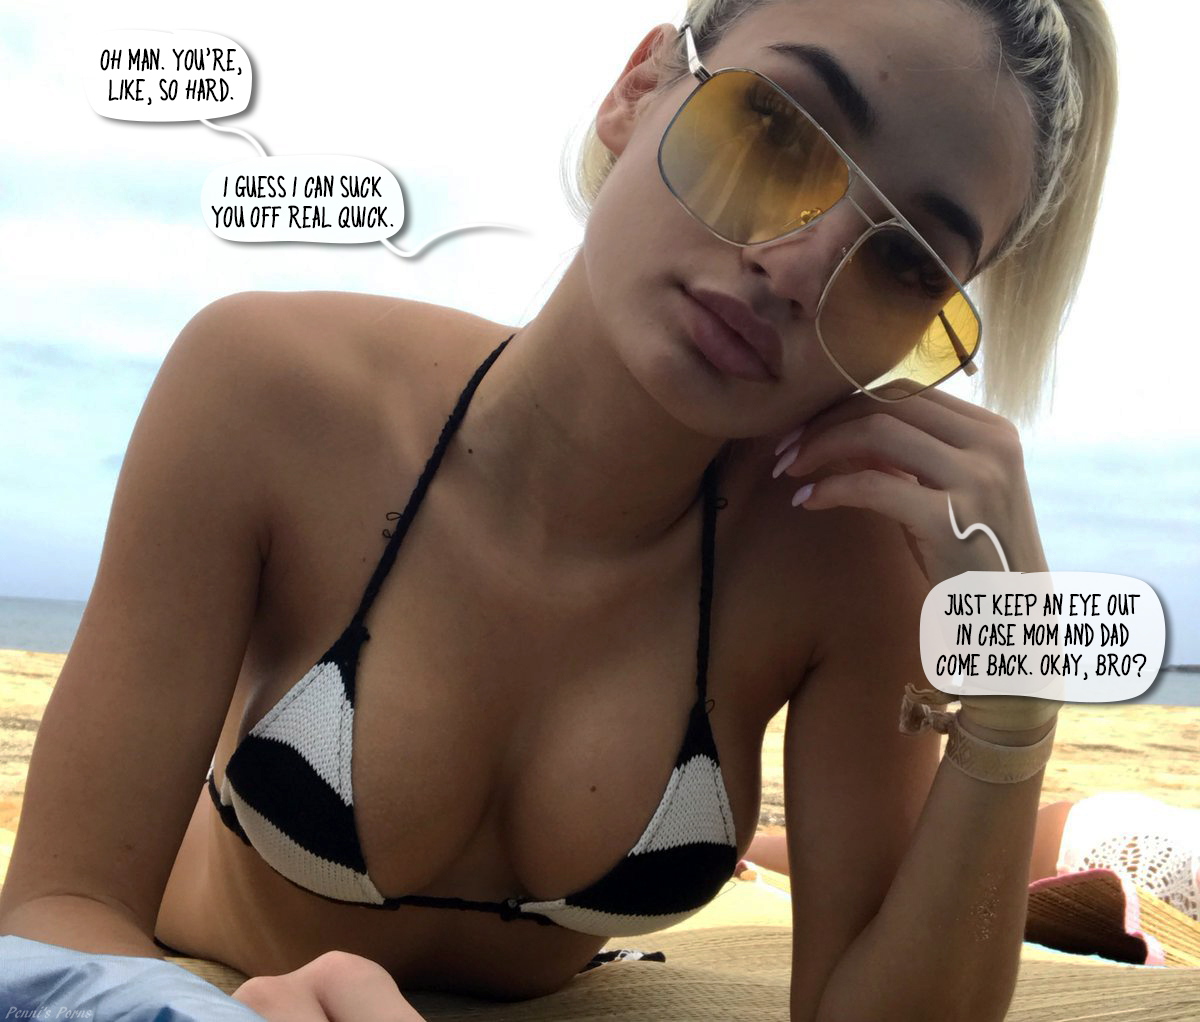 sensual jane is one of the sexiest women on planet earth #sister #brother #sisterbrother  #caption #teen #familycaptions #sisterteasing #beach #bikini #nonnude #nn #sunglasses #smalltits